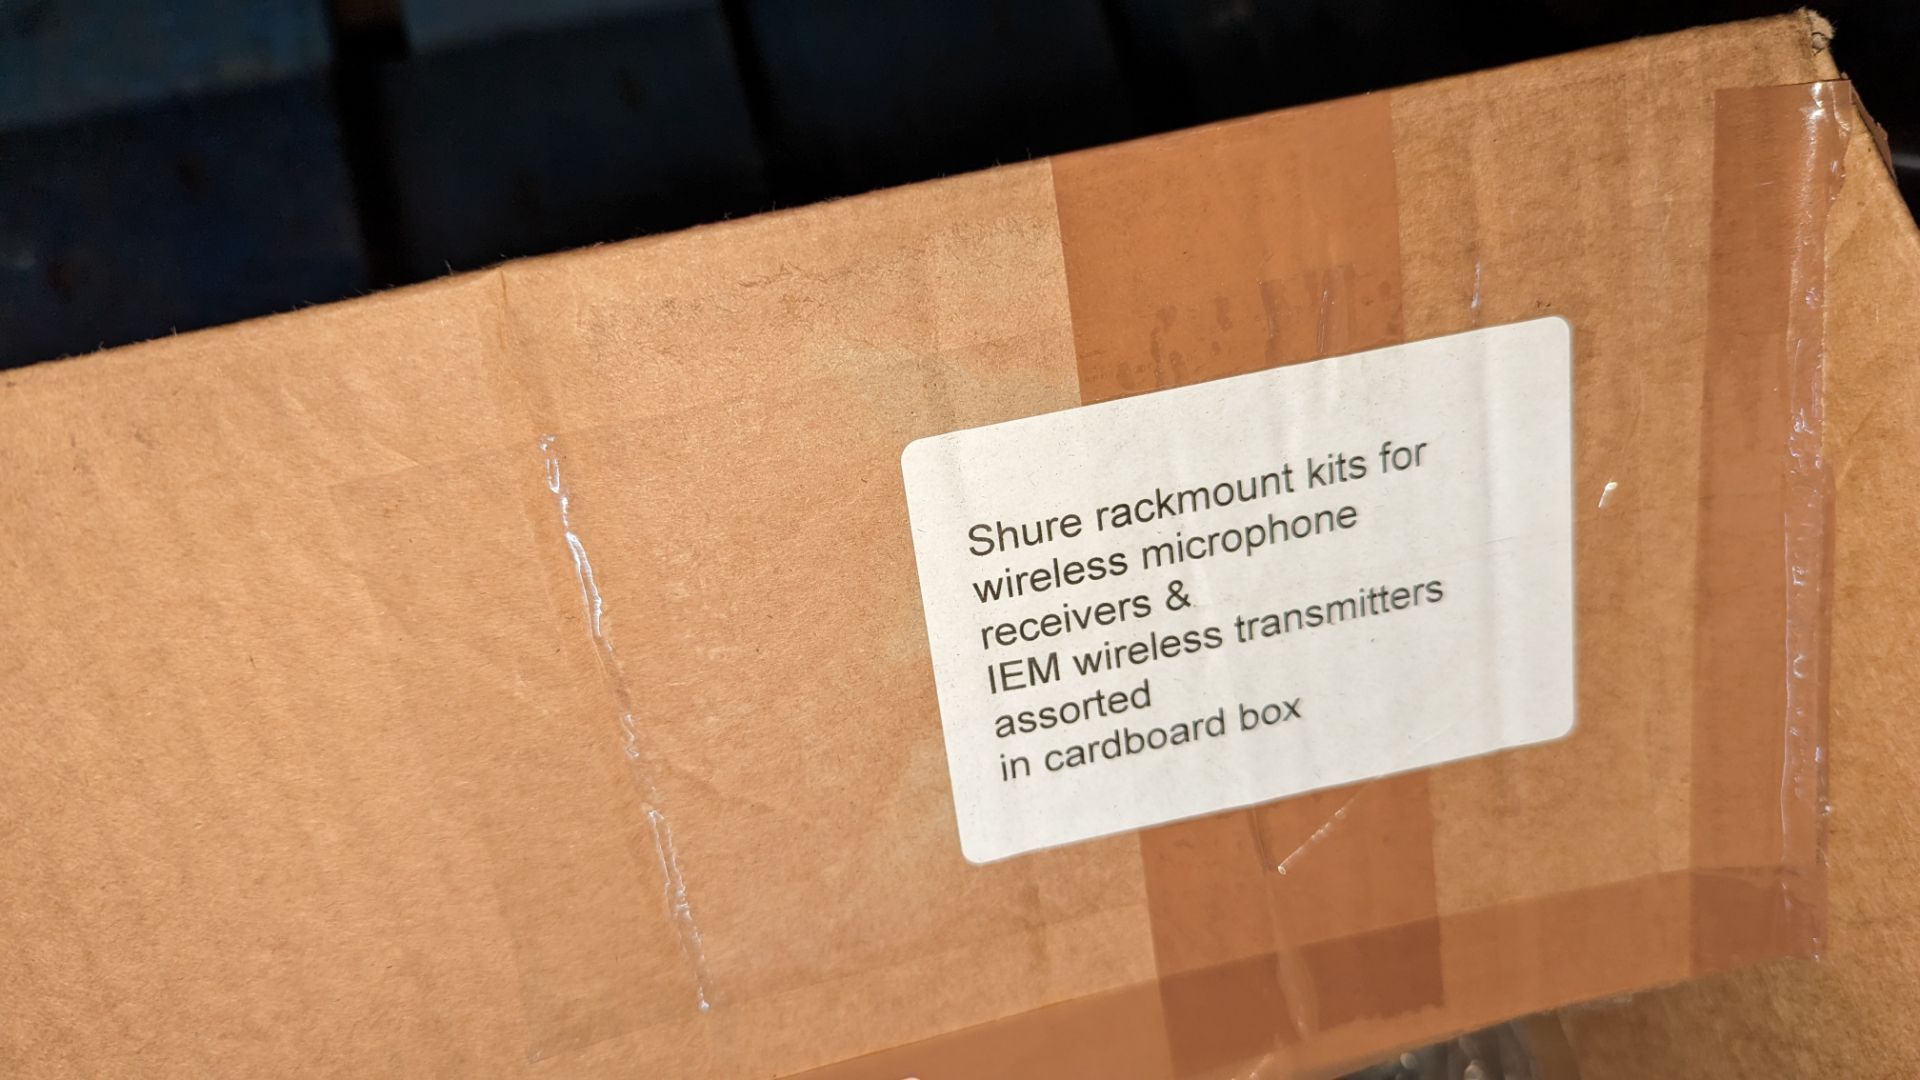 Quantity of Shure rack mount kits for wireless microphone receivers & IEM wireless transmitters. In - Image 4 of 6